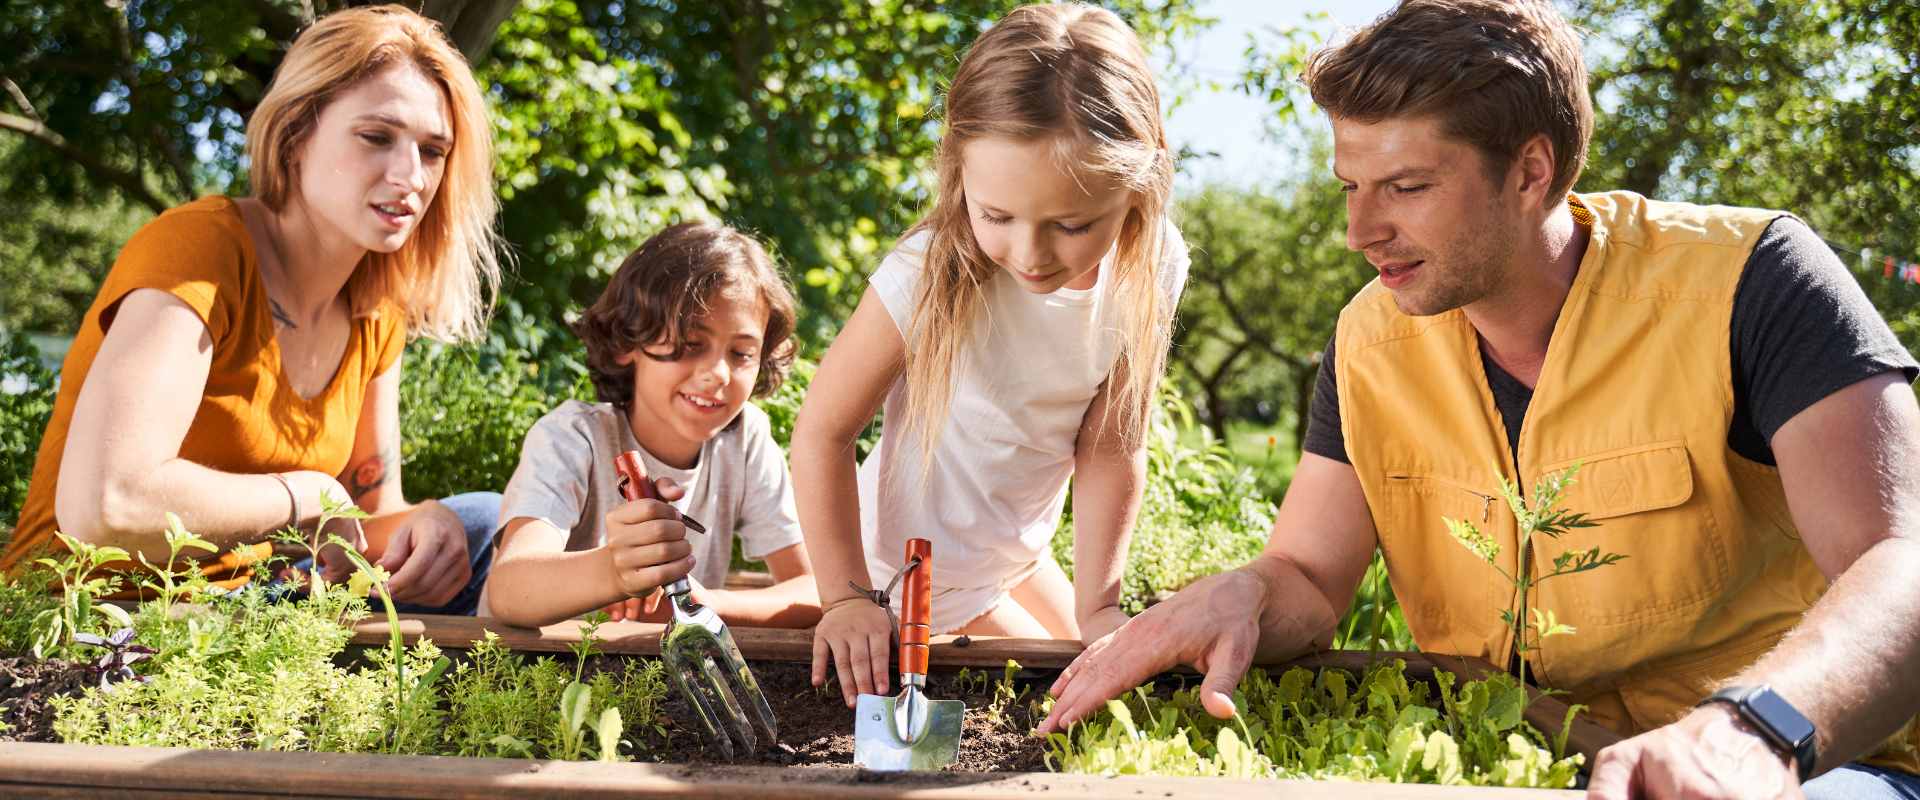 Teaching Them Young: Gardening With Kids | Kids Activity